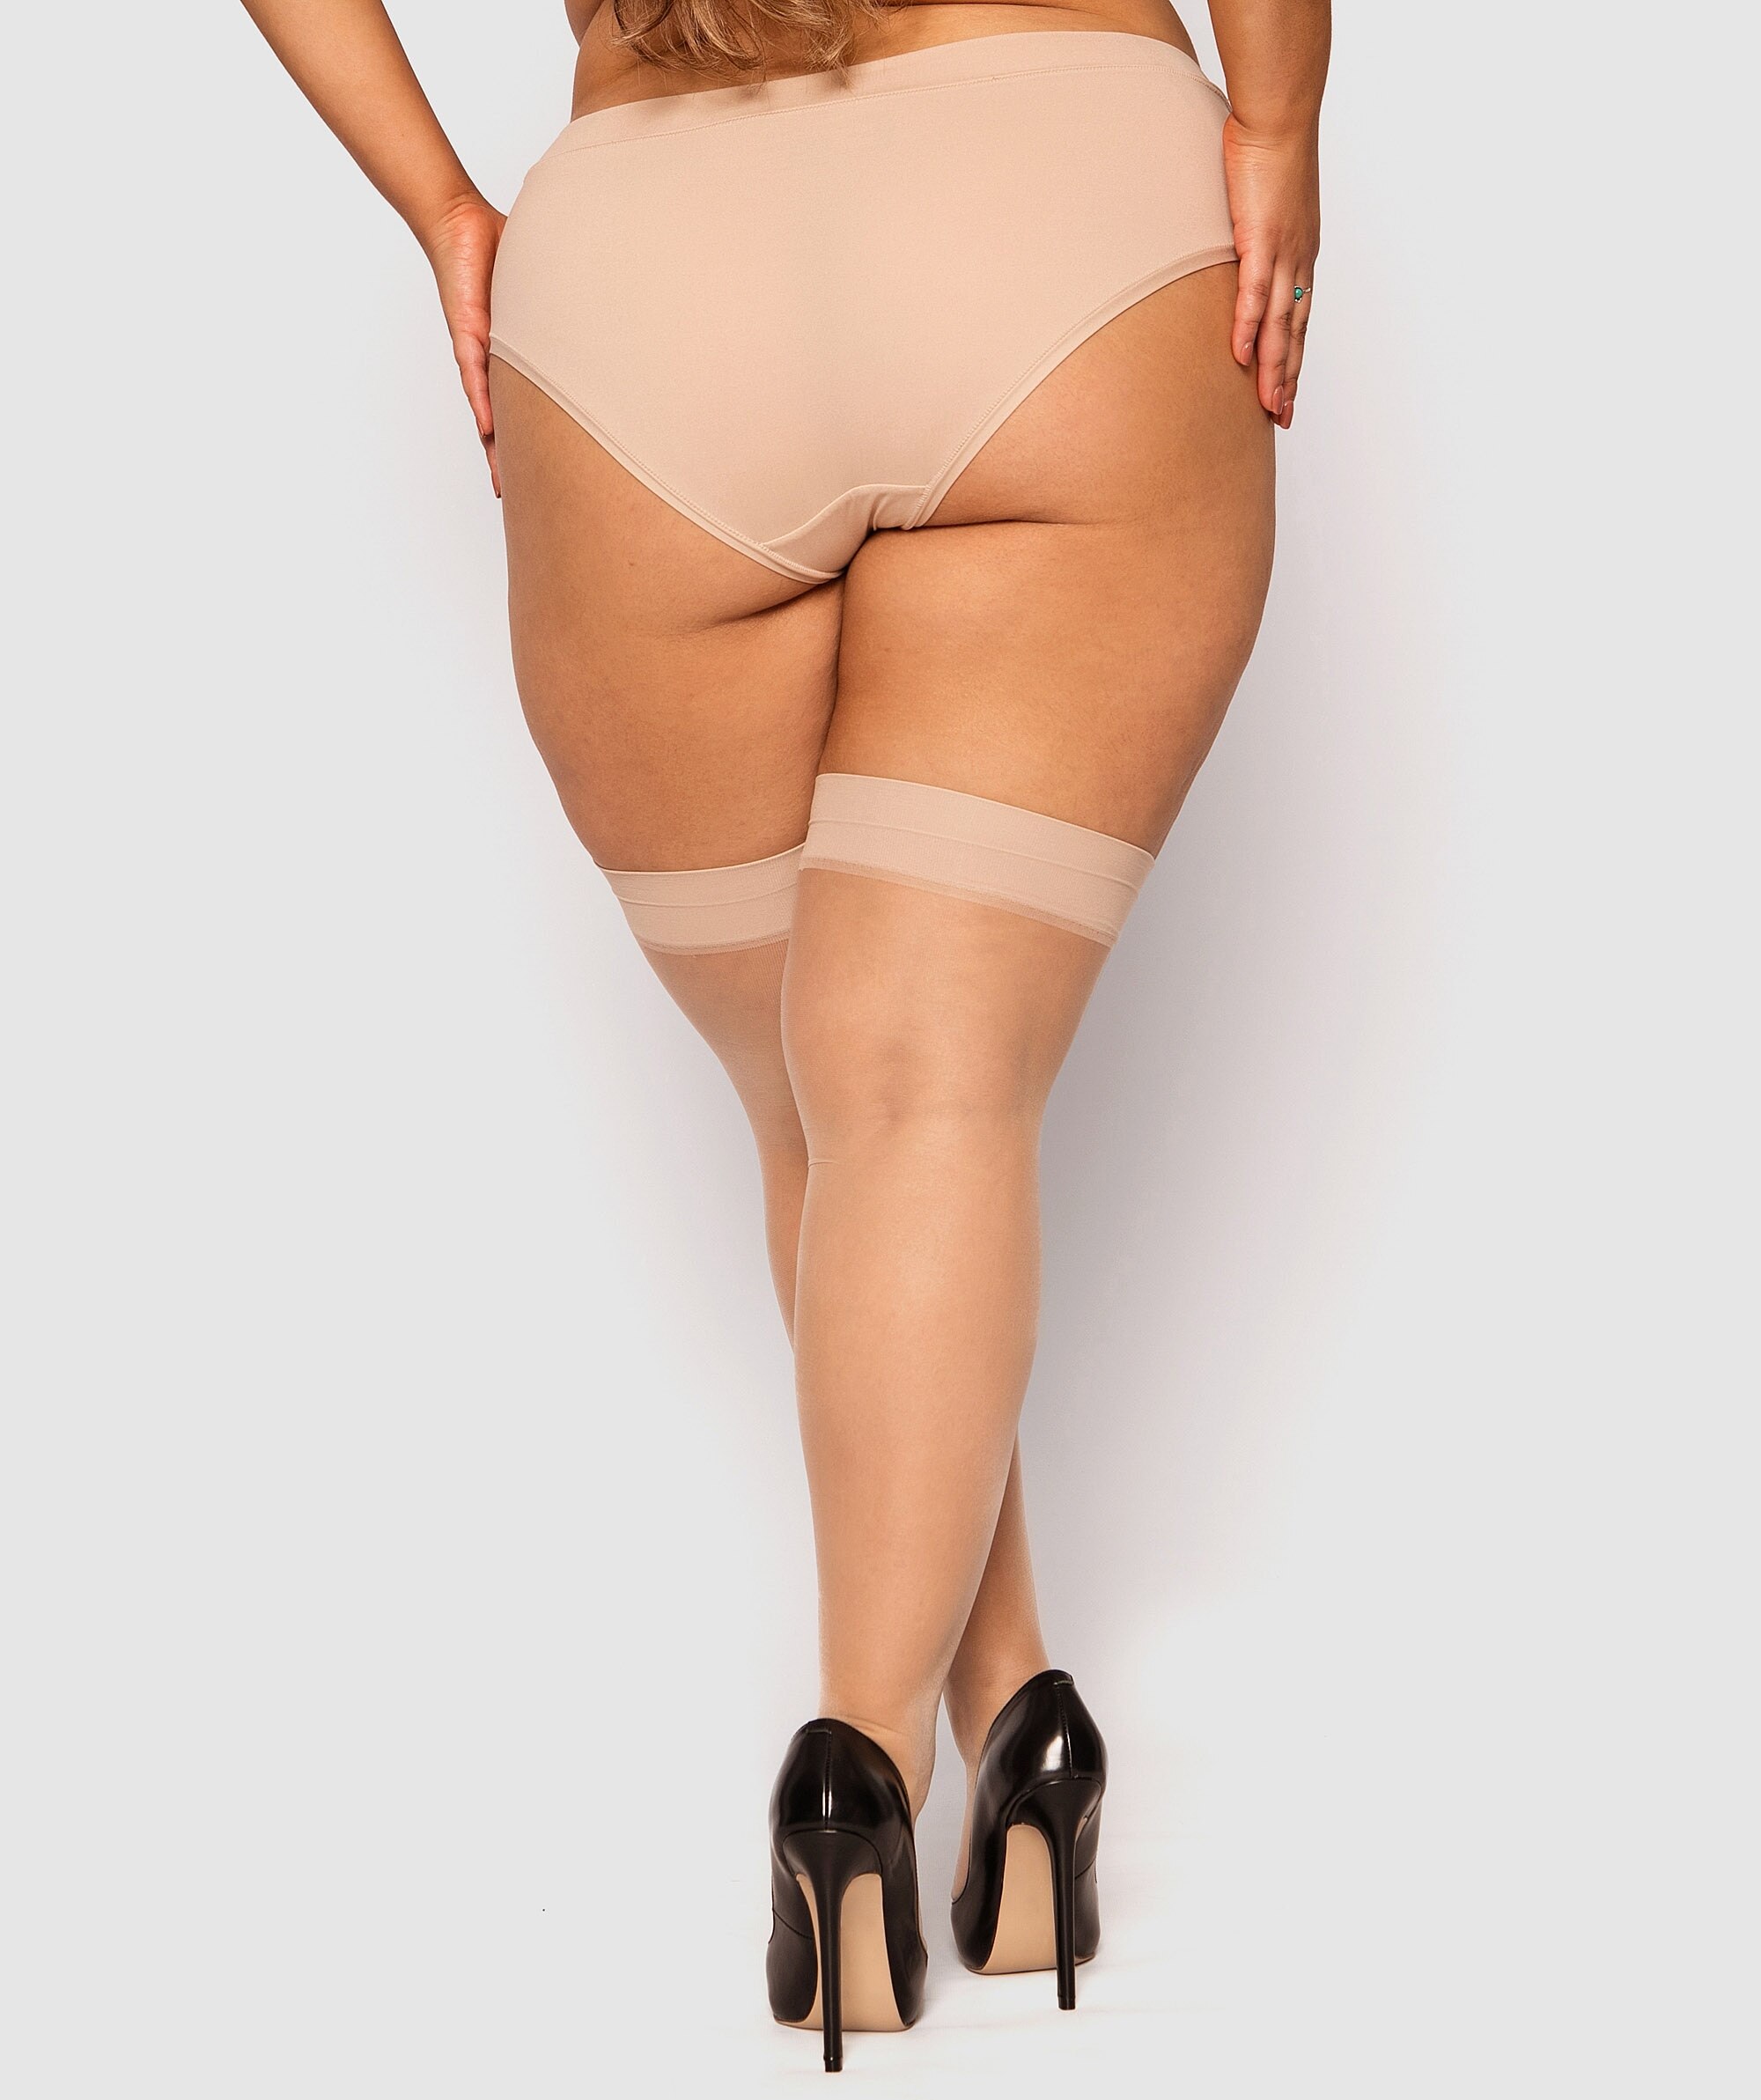 Curvy Smooth Top Stay Up Stockings - Nude 2